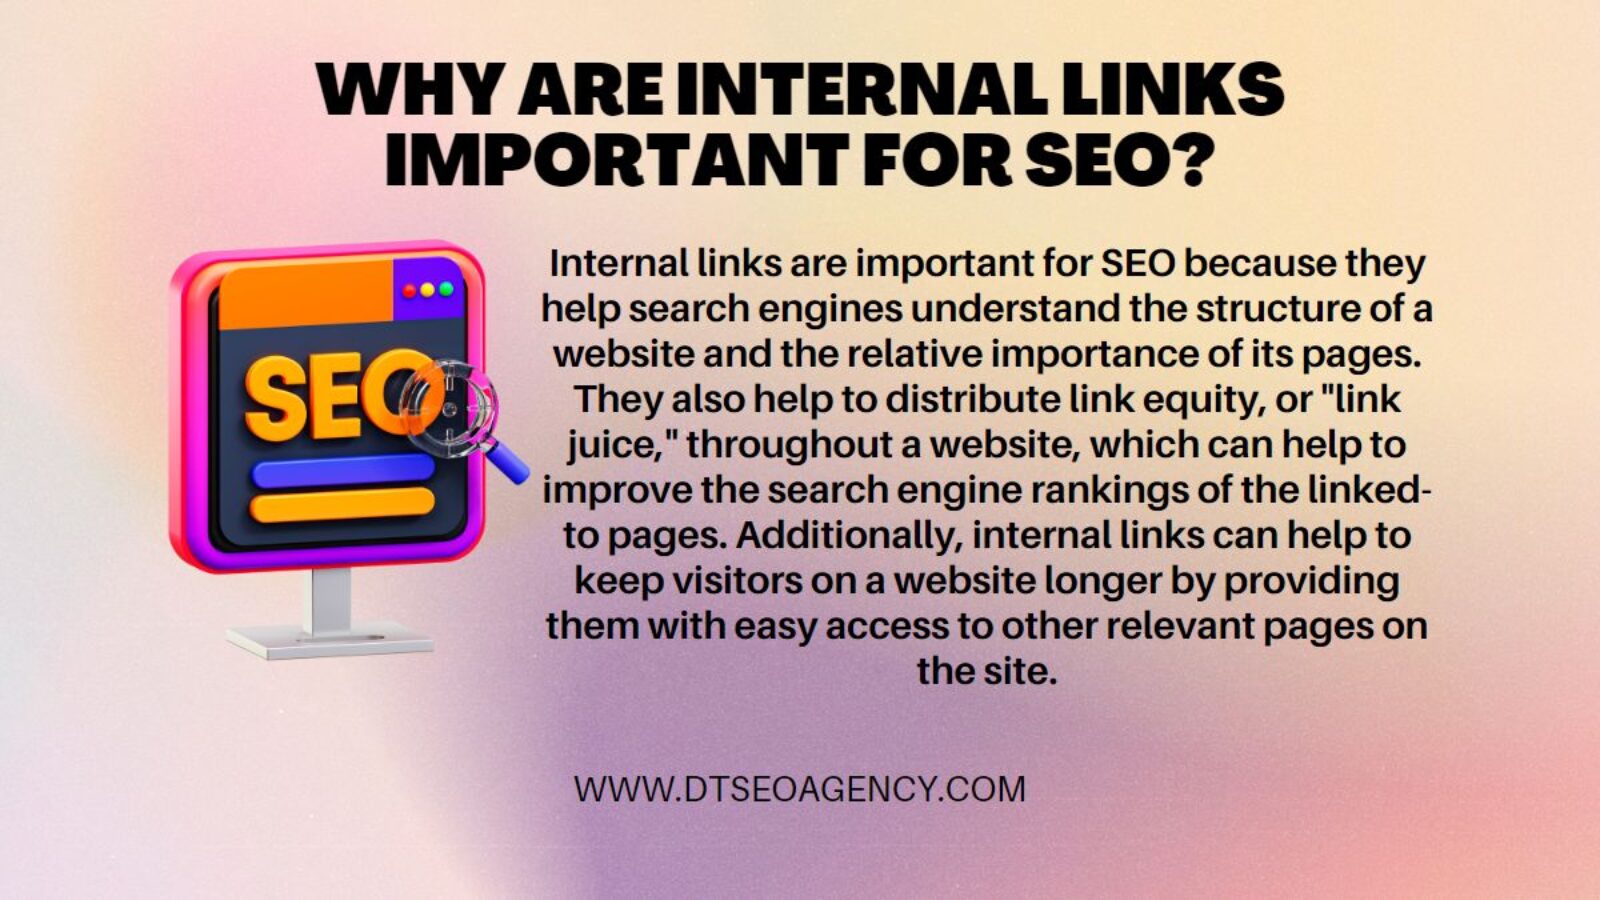 Why are internal links important for SEO?